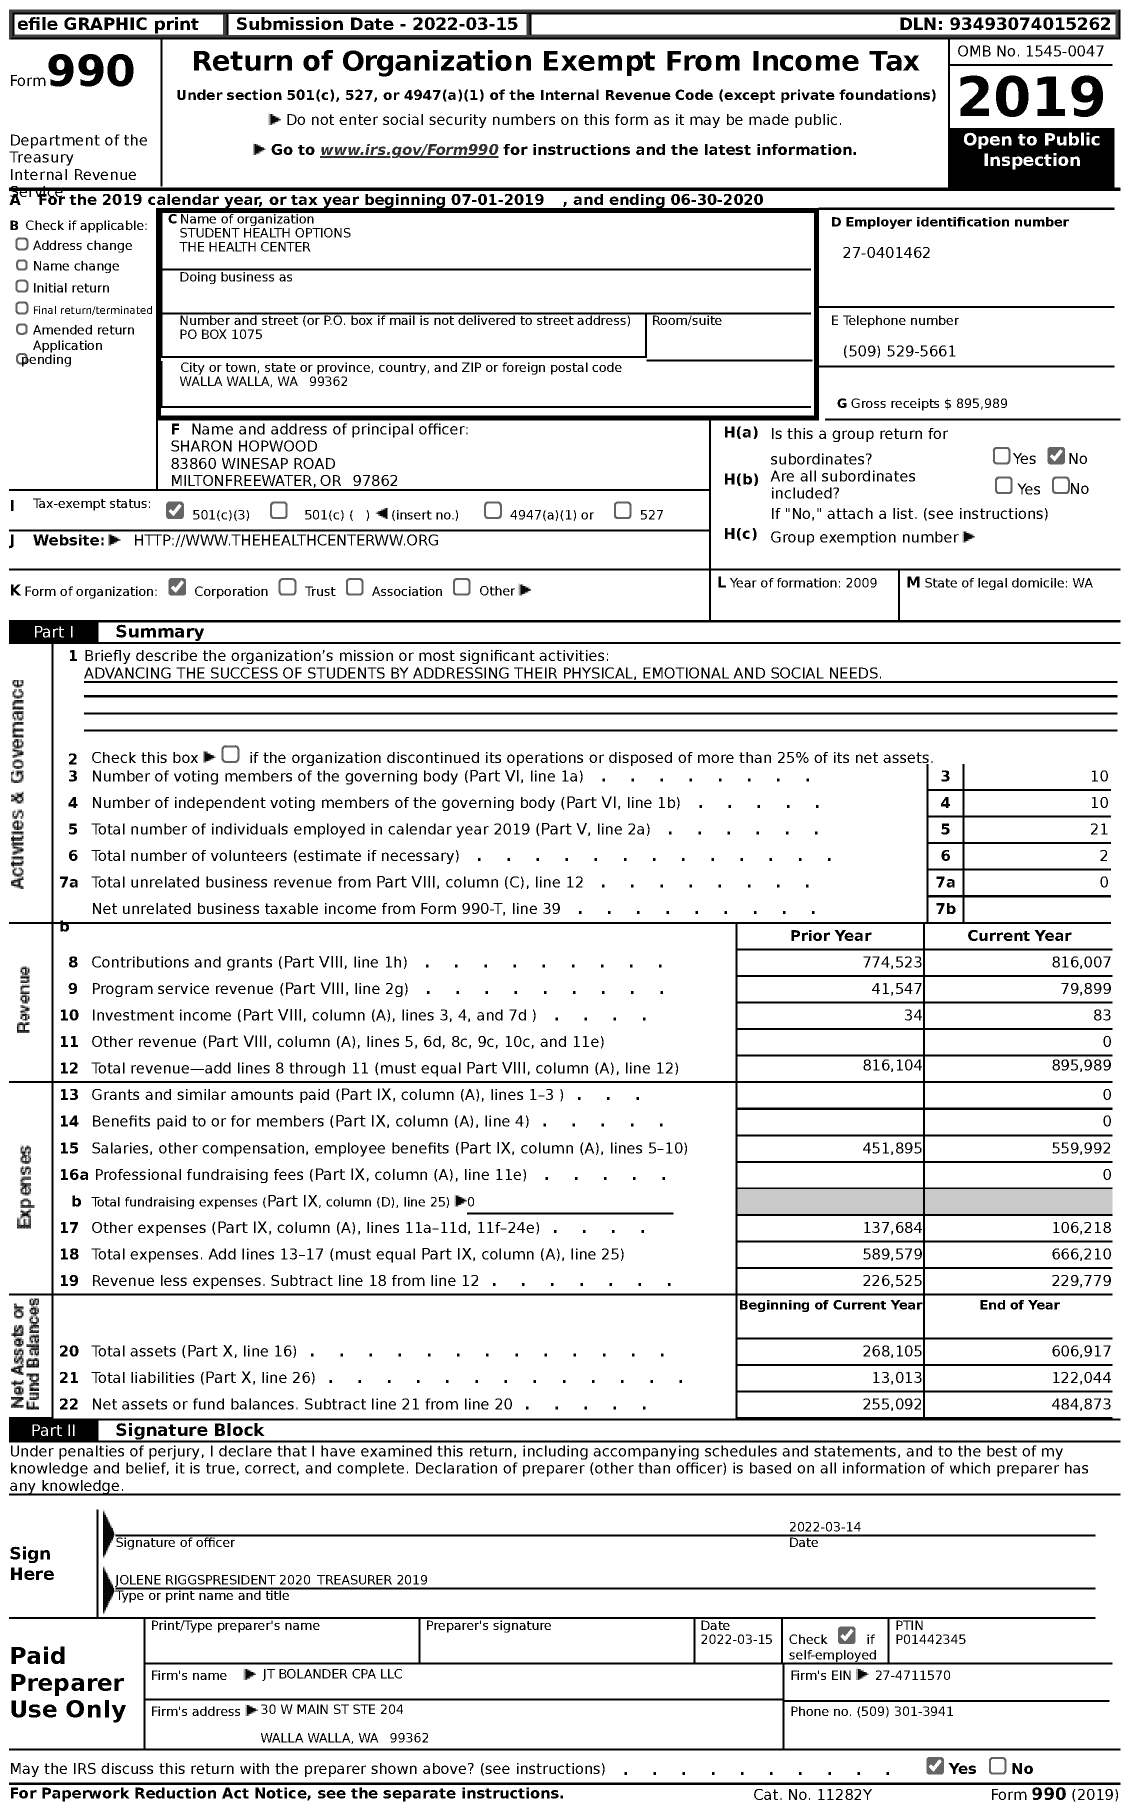 Image of first page of 2019 Form 990 for Student Health Options the Health Center